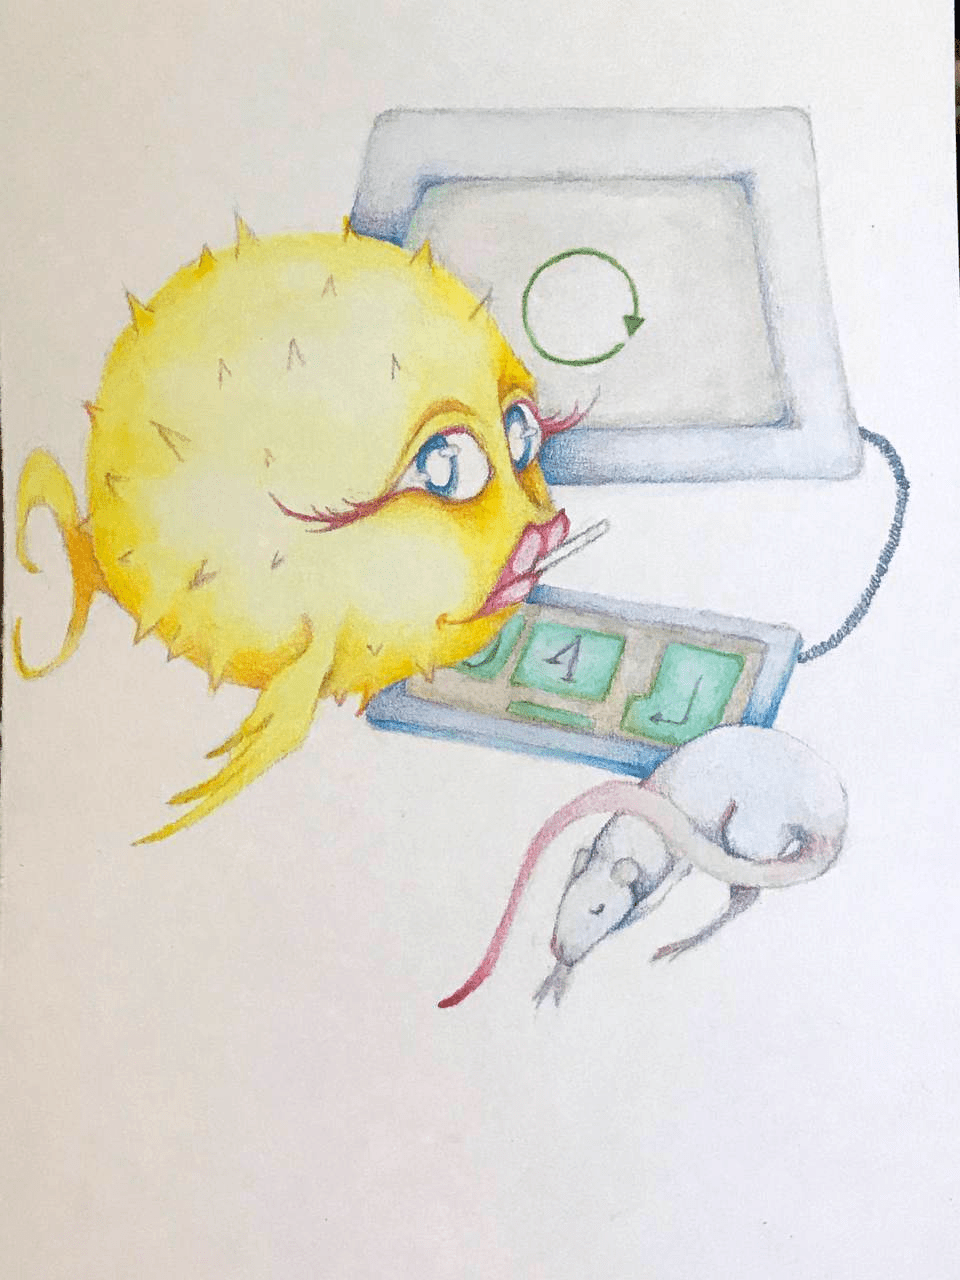 A Puffy using a computer